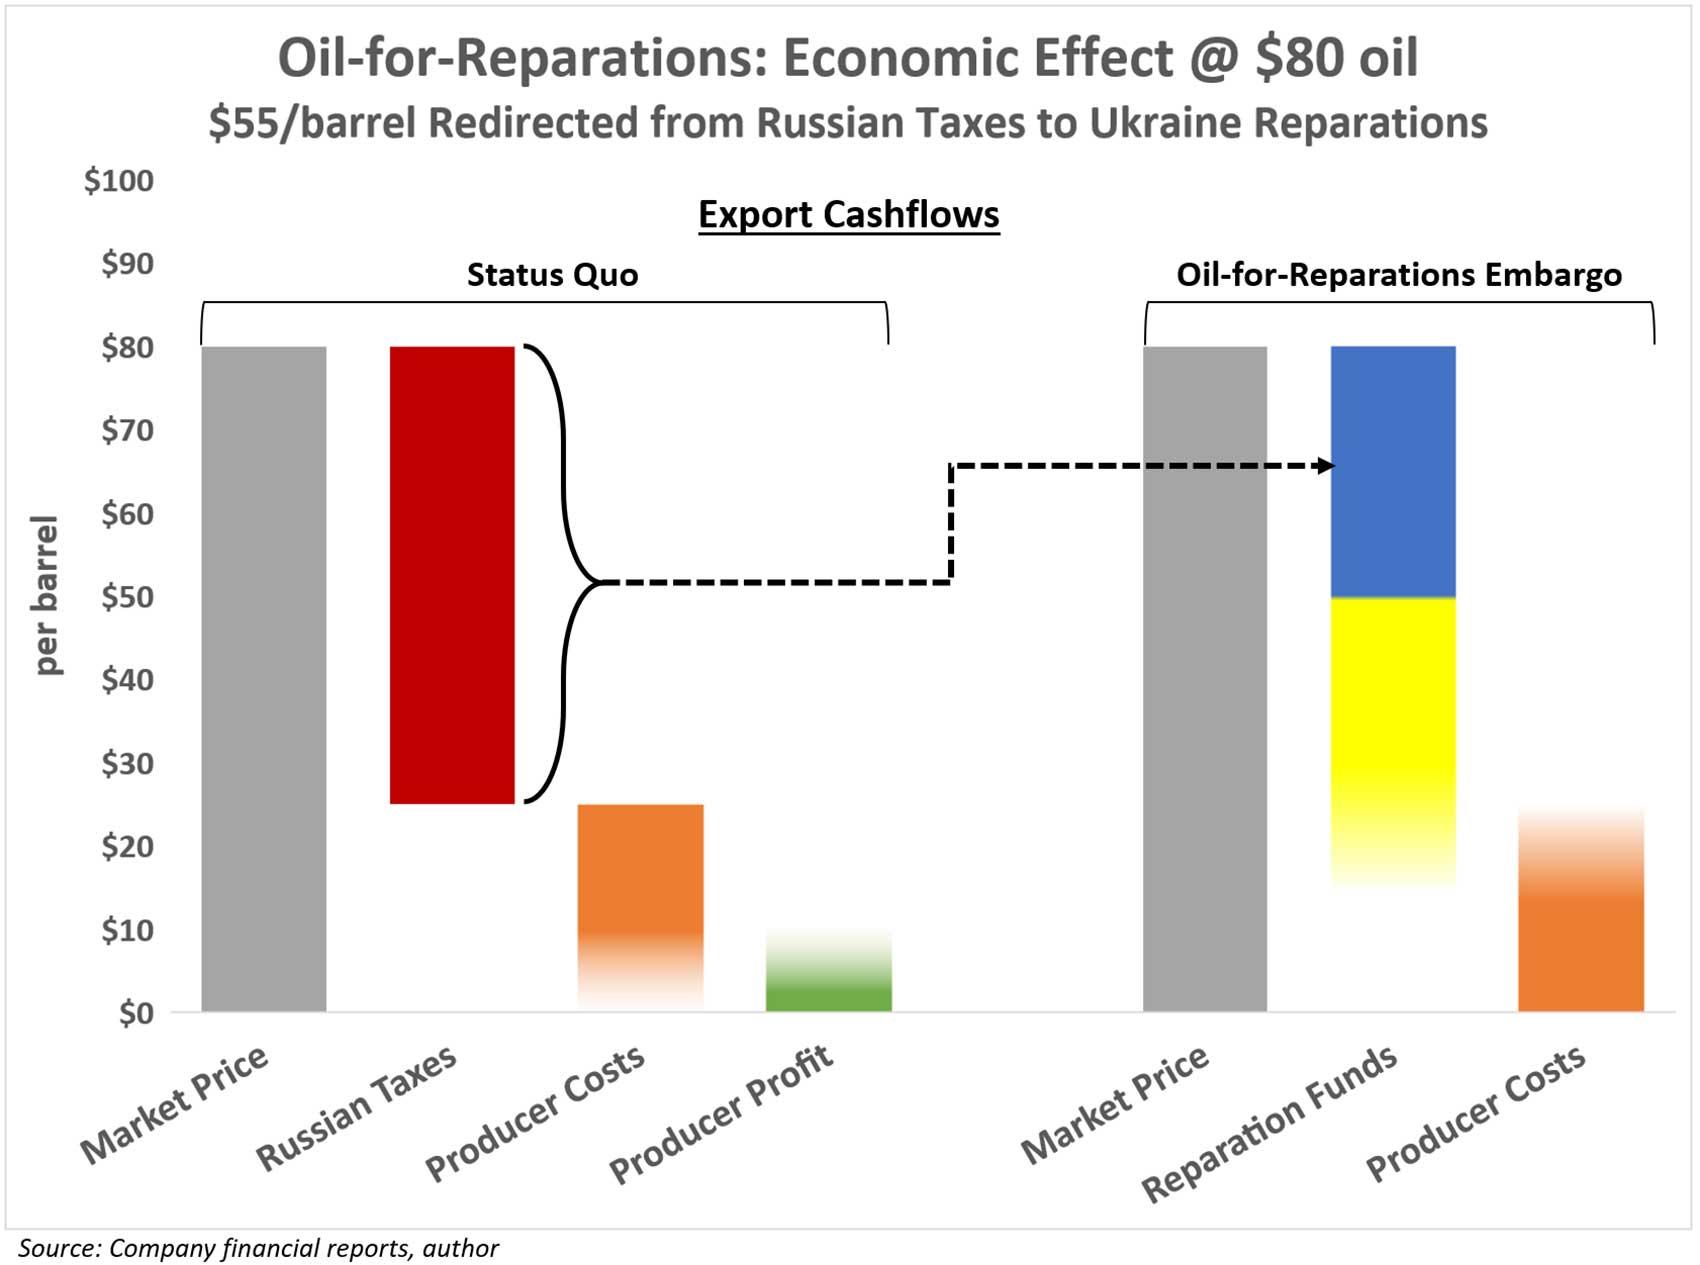 Oil-for-Reparations: Economic Effect at $80 oil, $55/barrel redirected from Russian taxes to Ukraine reparations